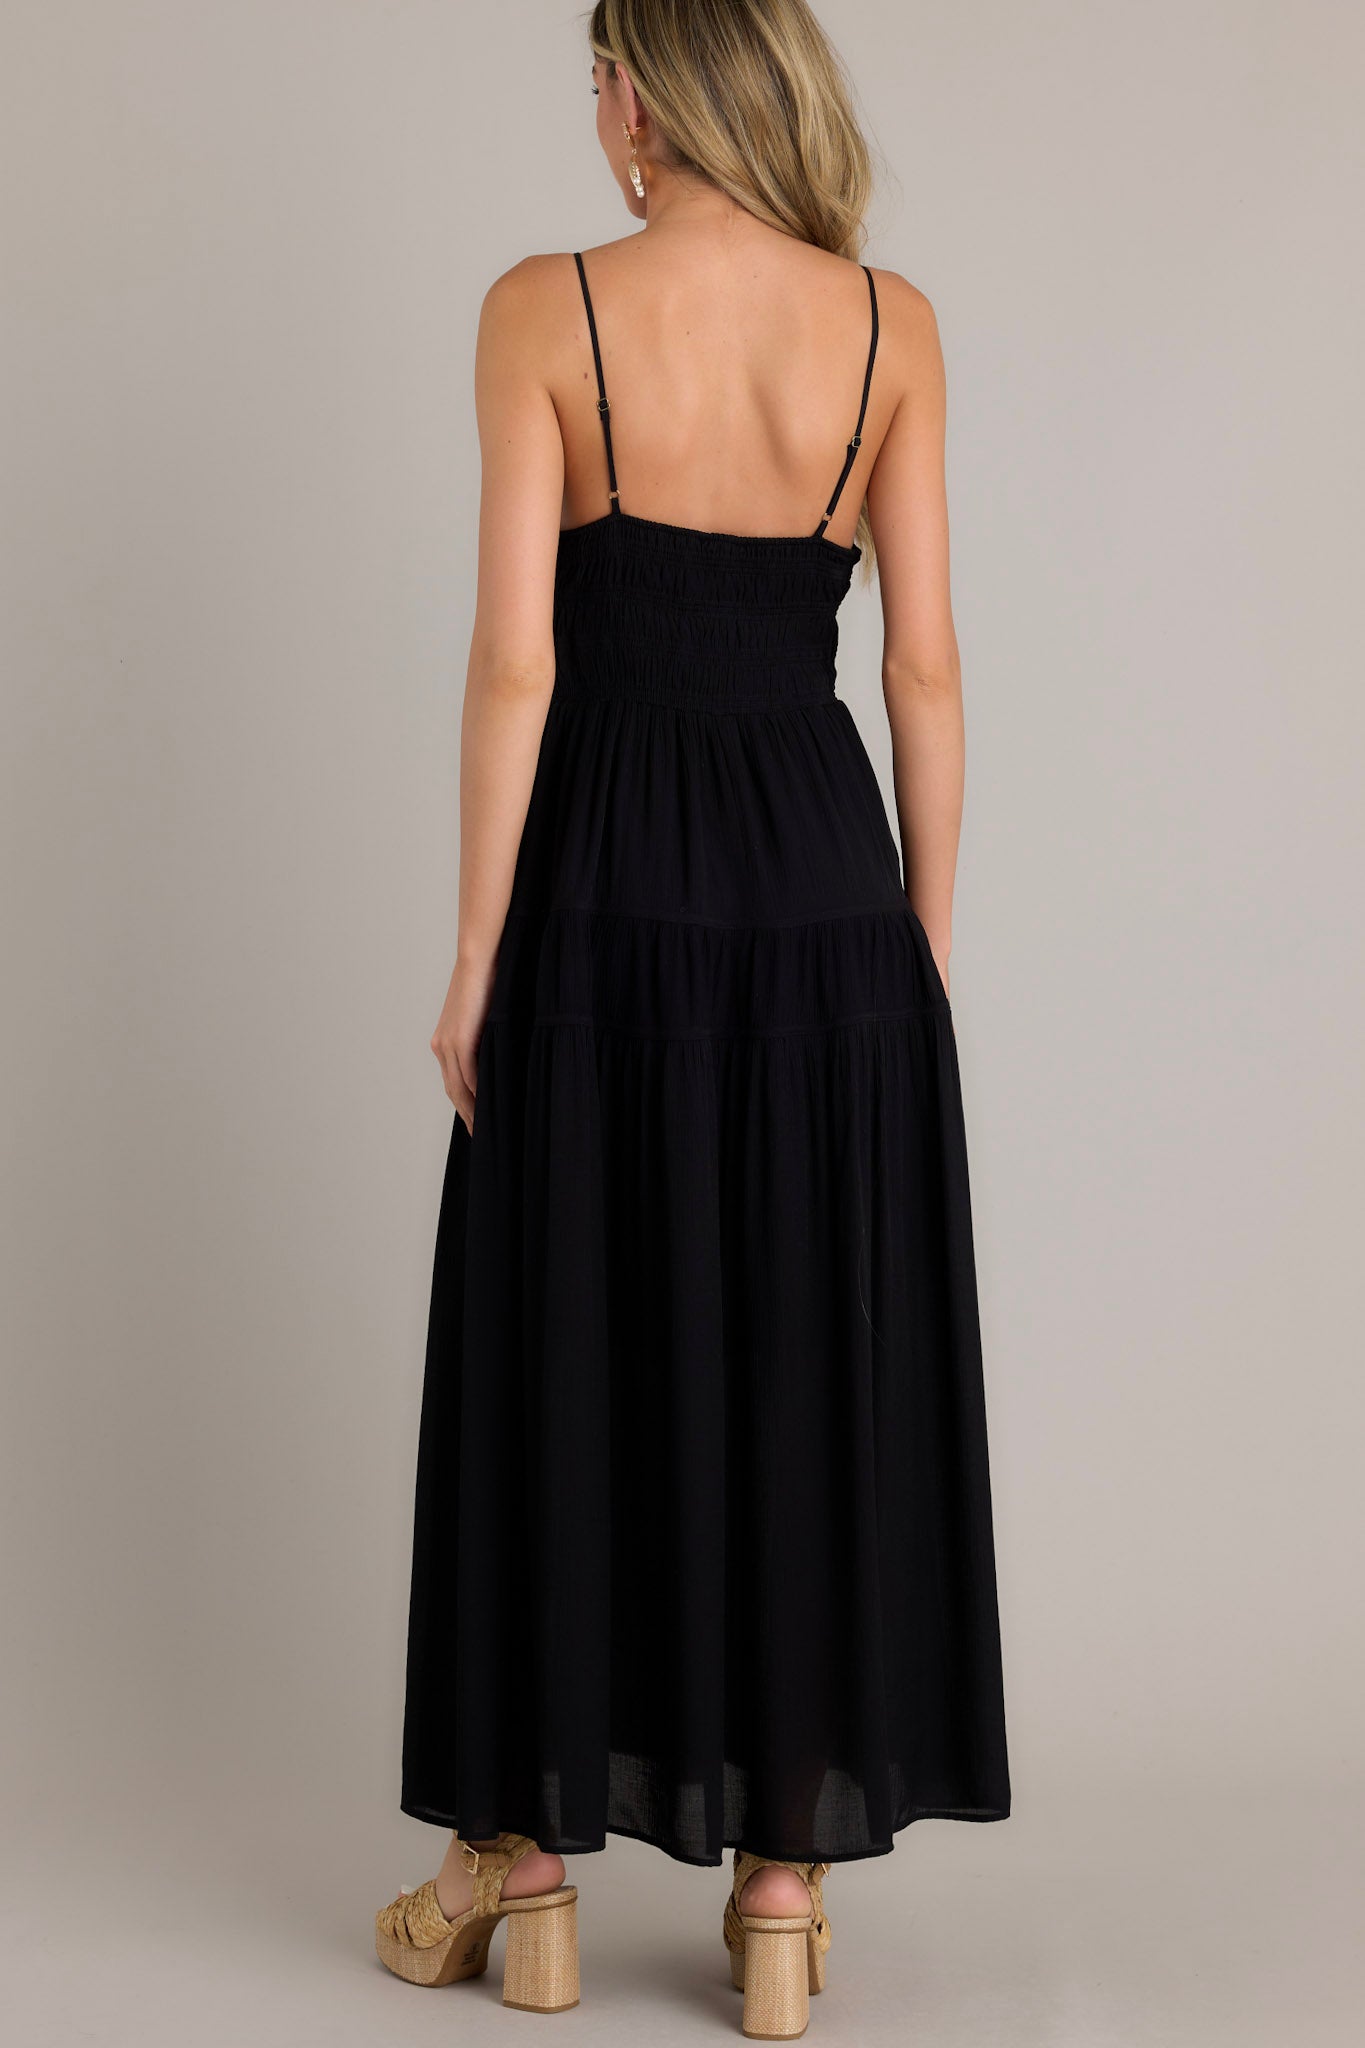 Back view of a black maxi dress highlighting the open back, thin adjustable straps, fully smocked waist and lower back, tiers, and a flowing silhouette.